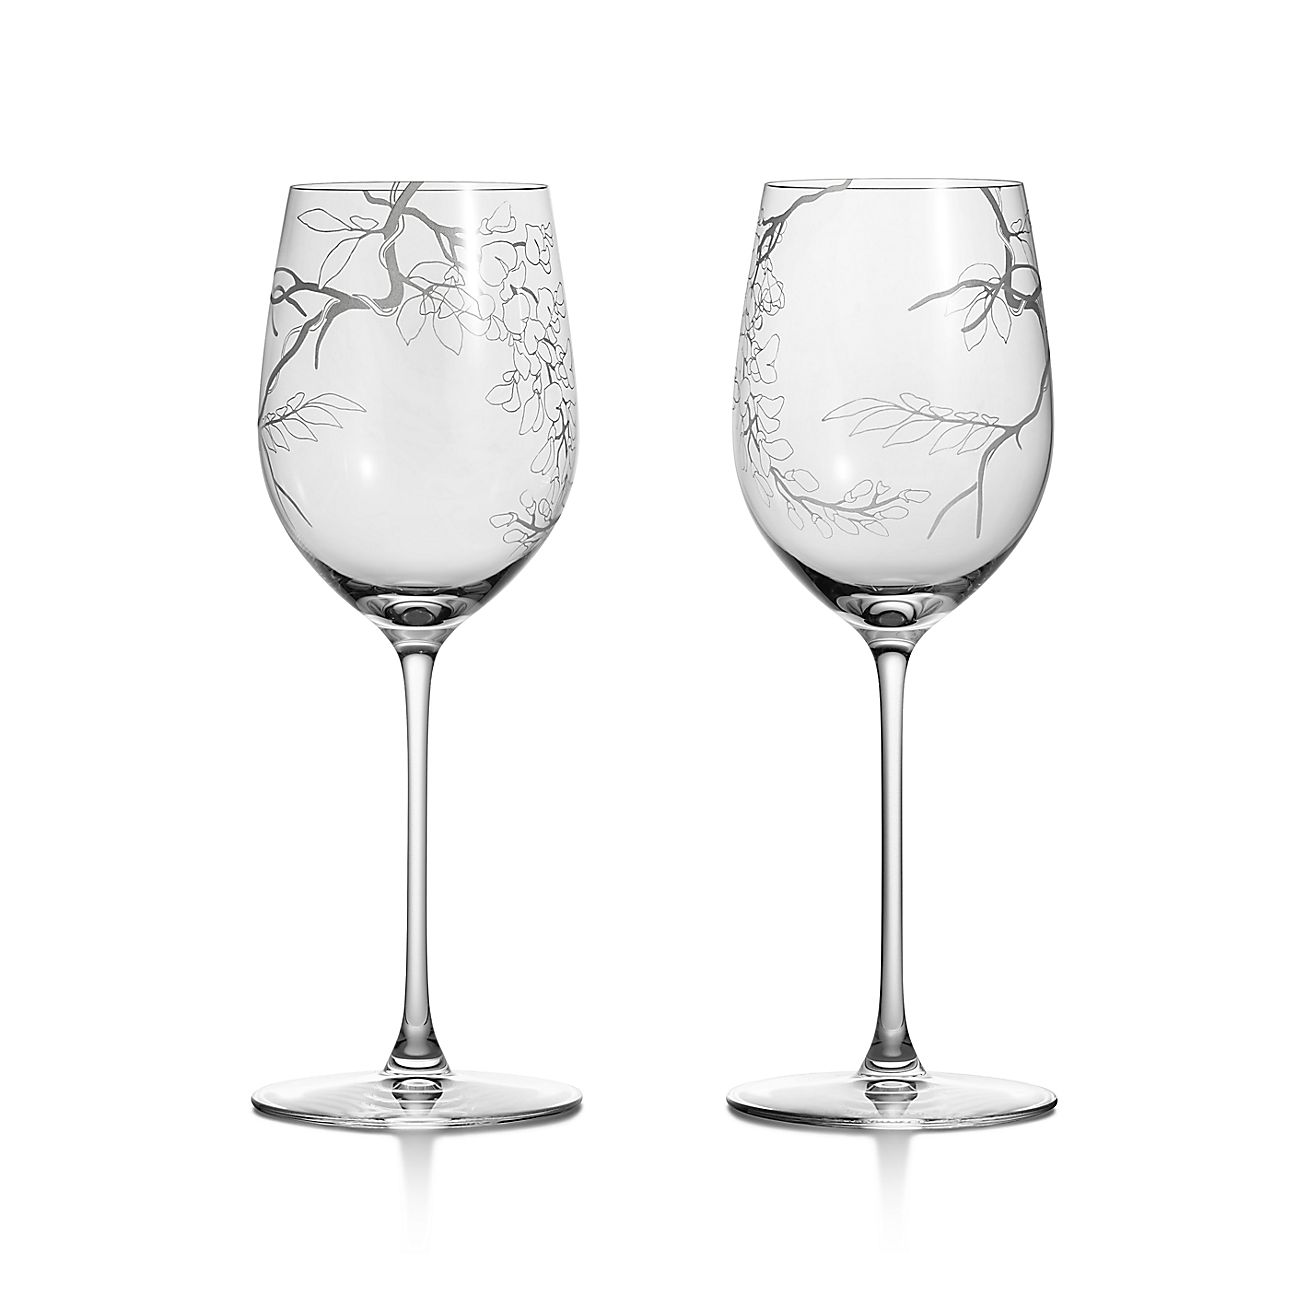 Tiffany Wisteria Red Wine Glasses in Etched Glass, Set of Two